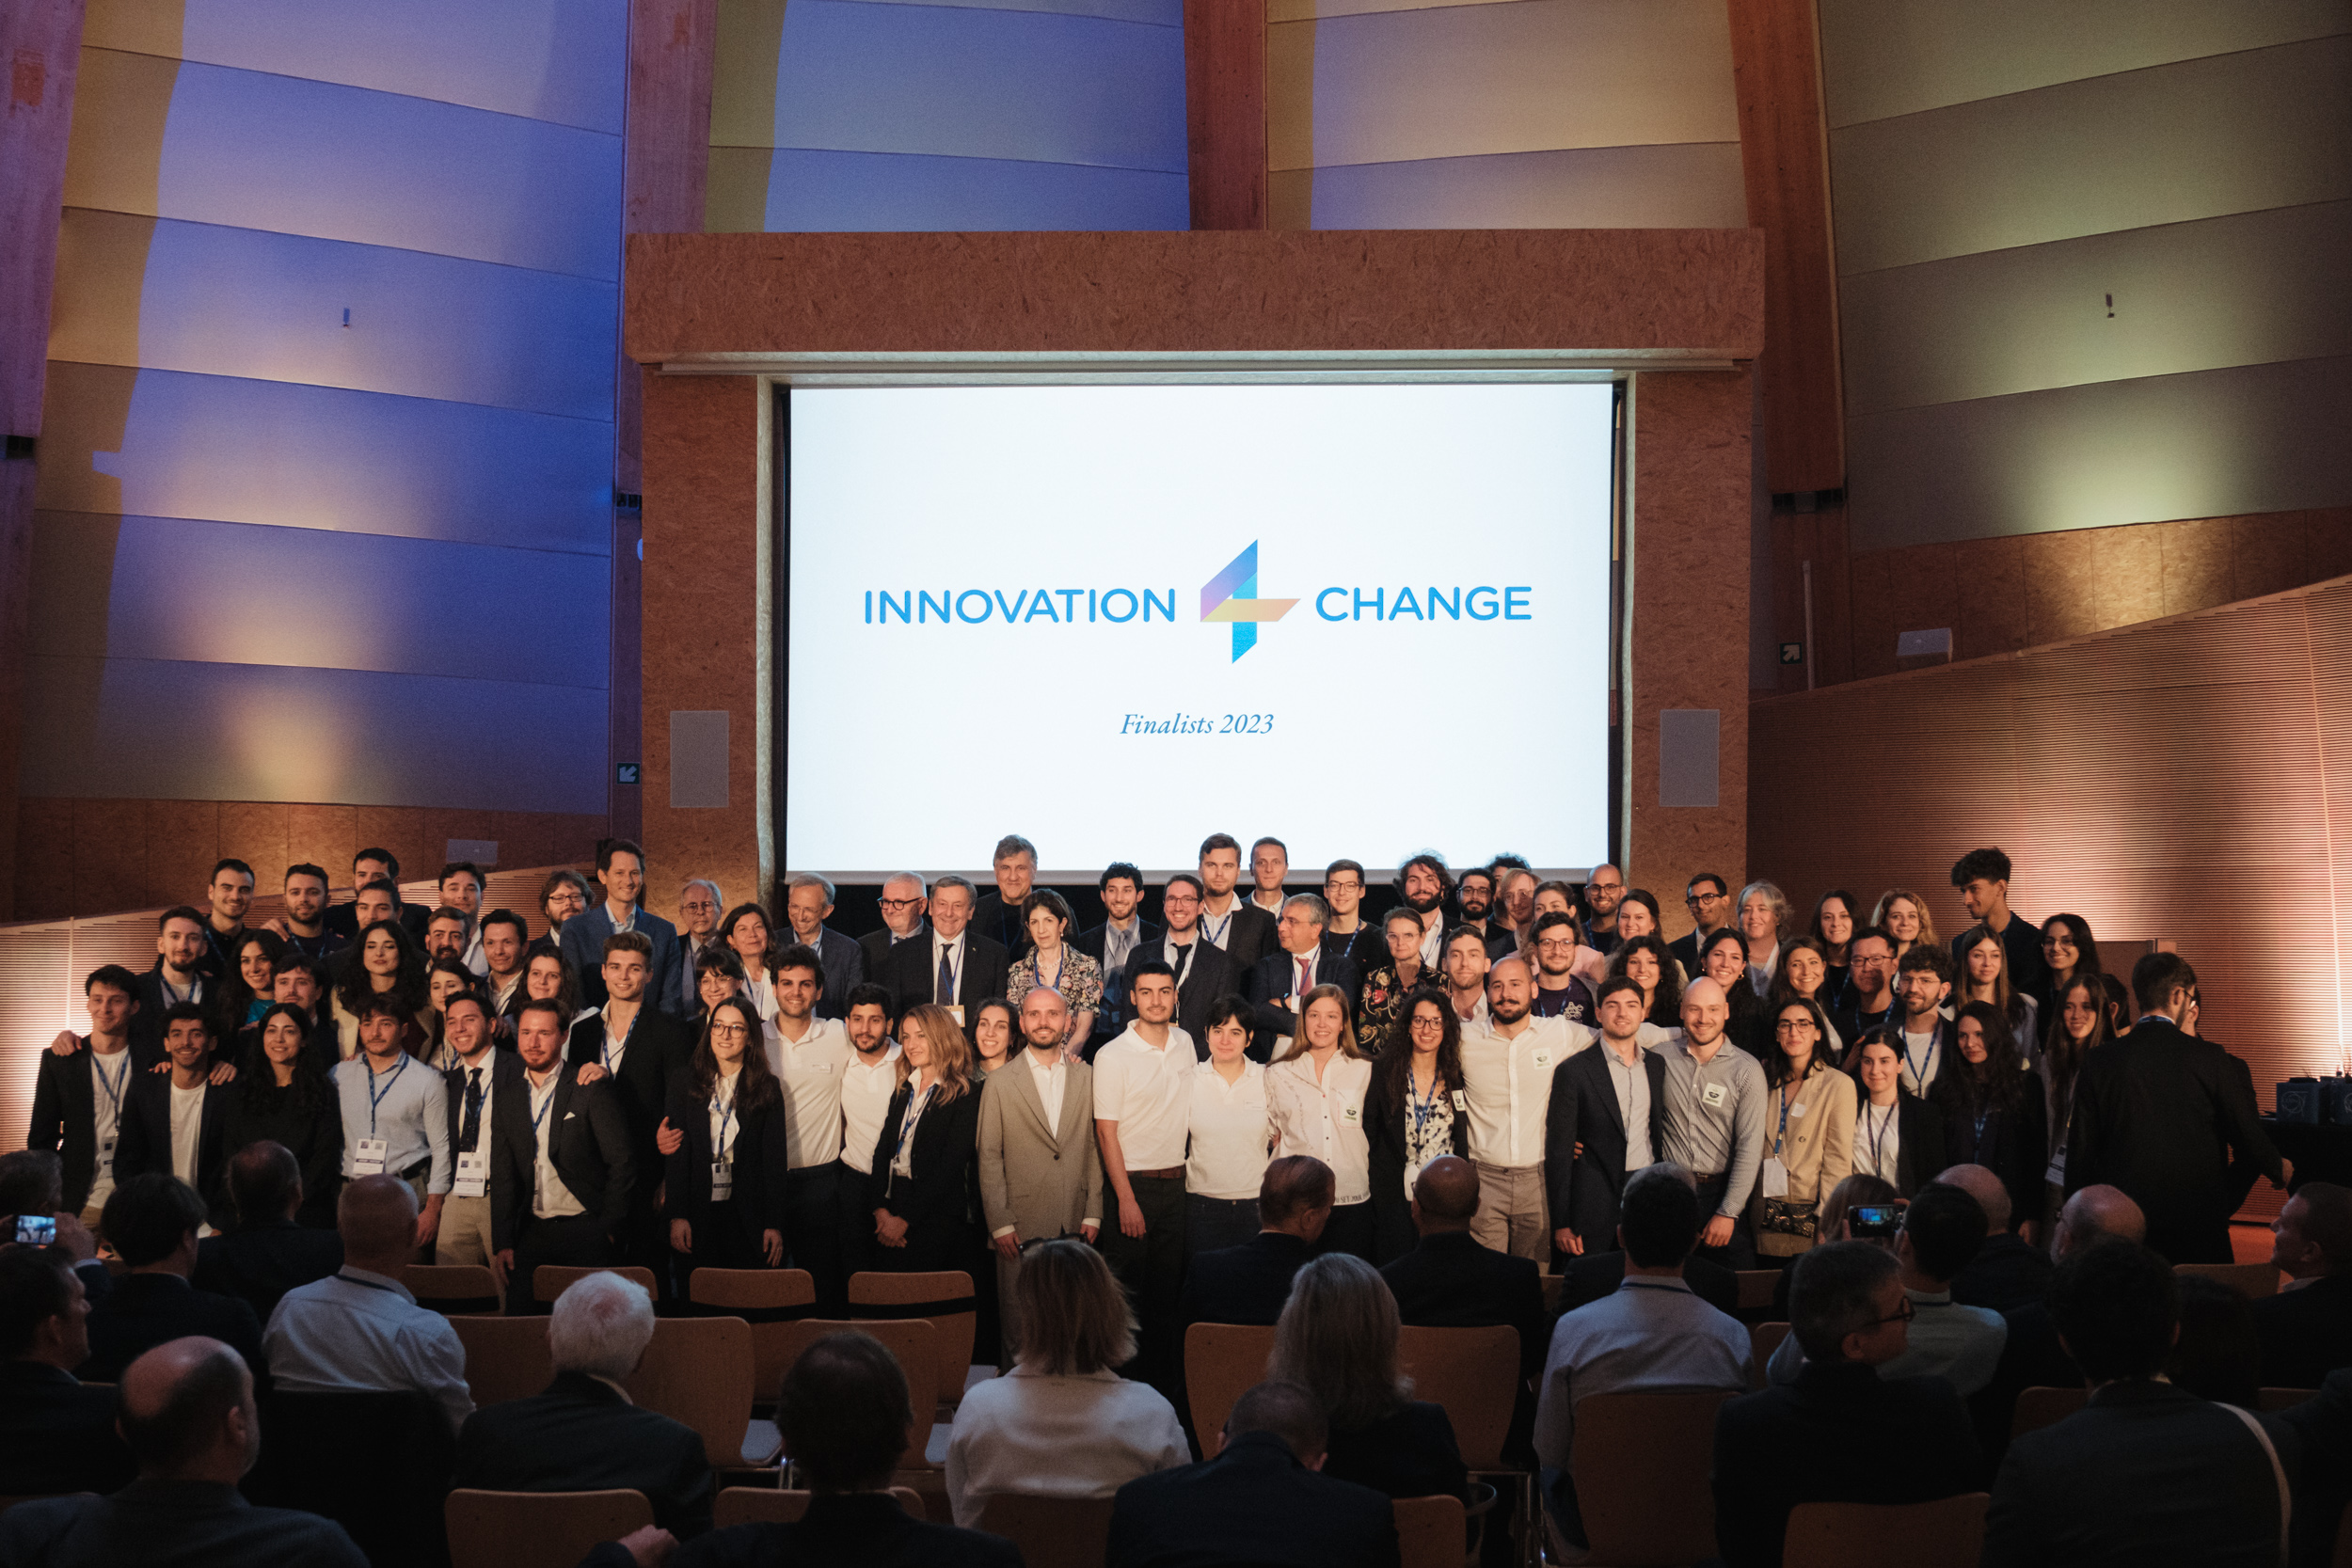 Innovation 4 Change teams and Jury at the Globe of Science and Innovation at CERN